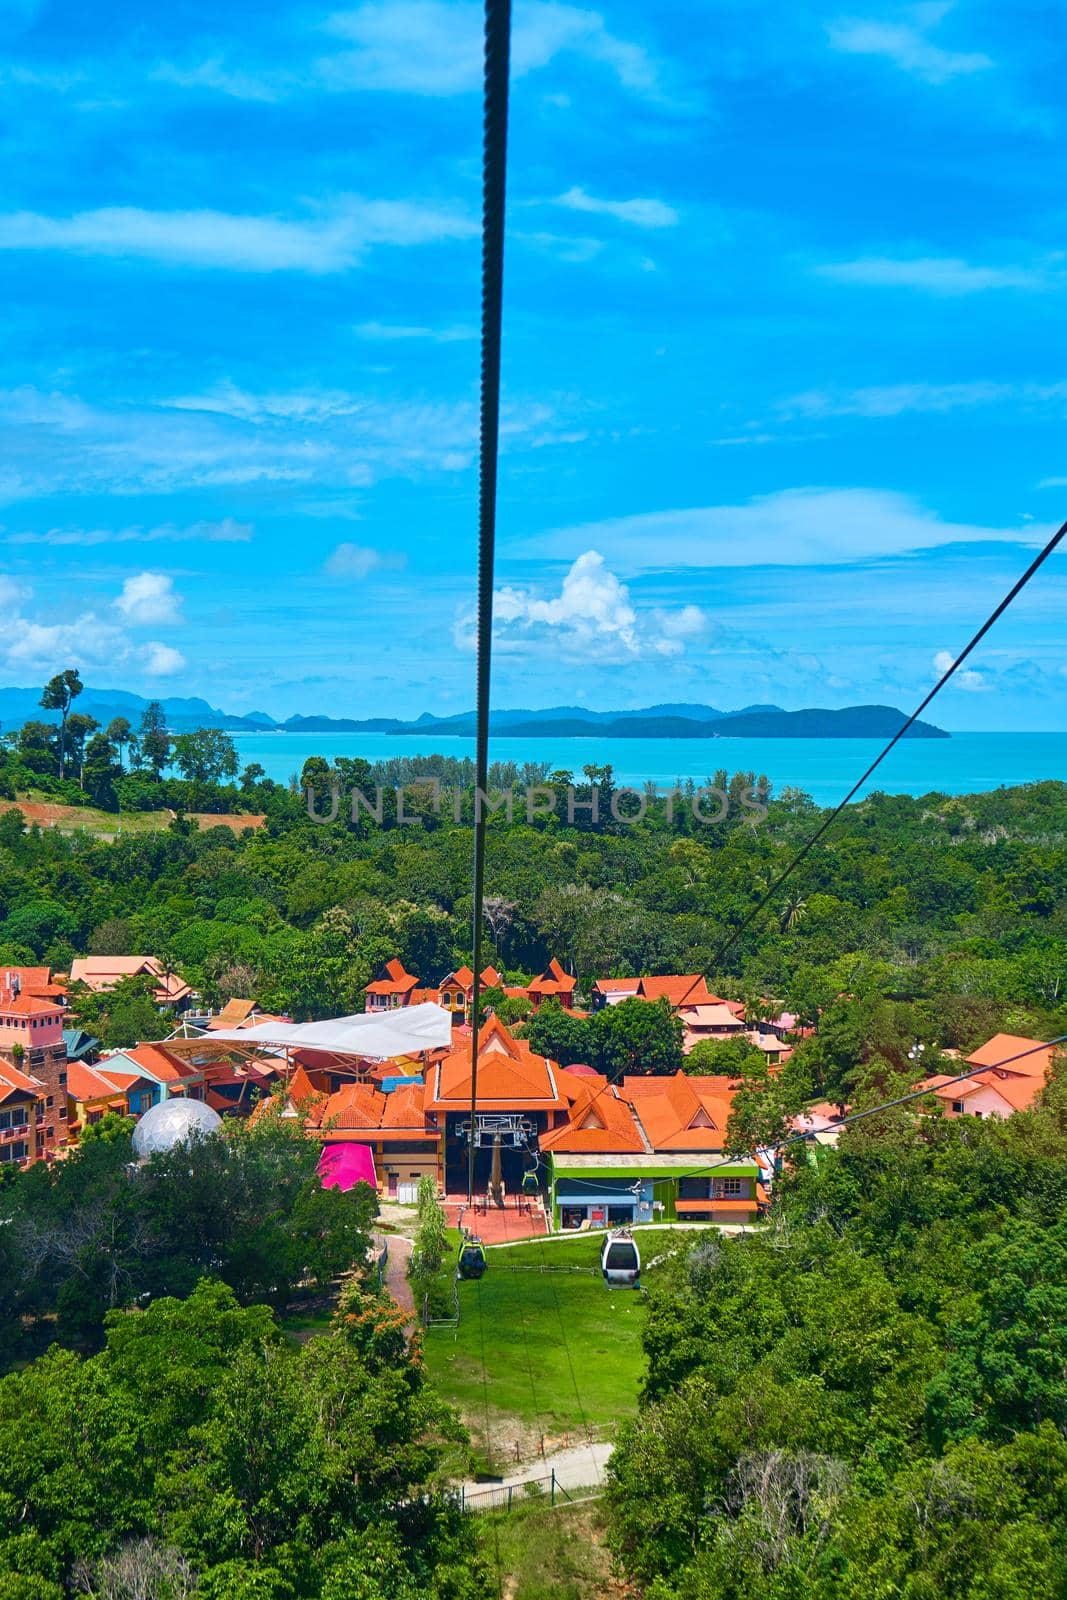 View from a cable car ride high into the mountains on the tropical island of Langkawi. Incredible natural landscape.